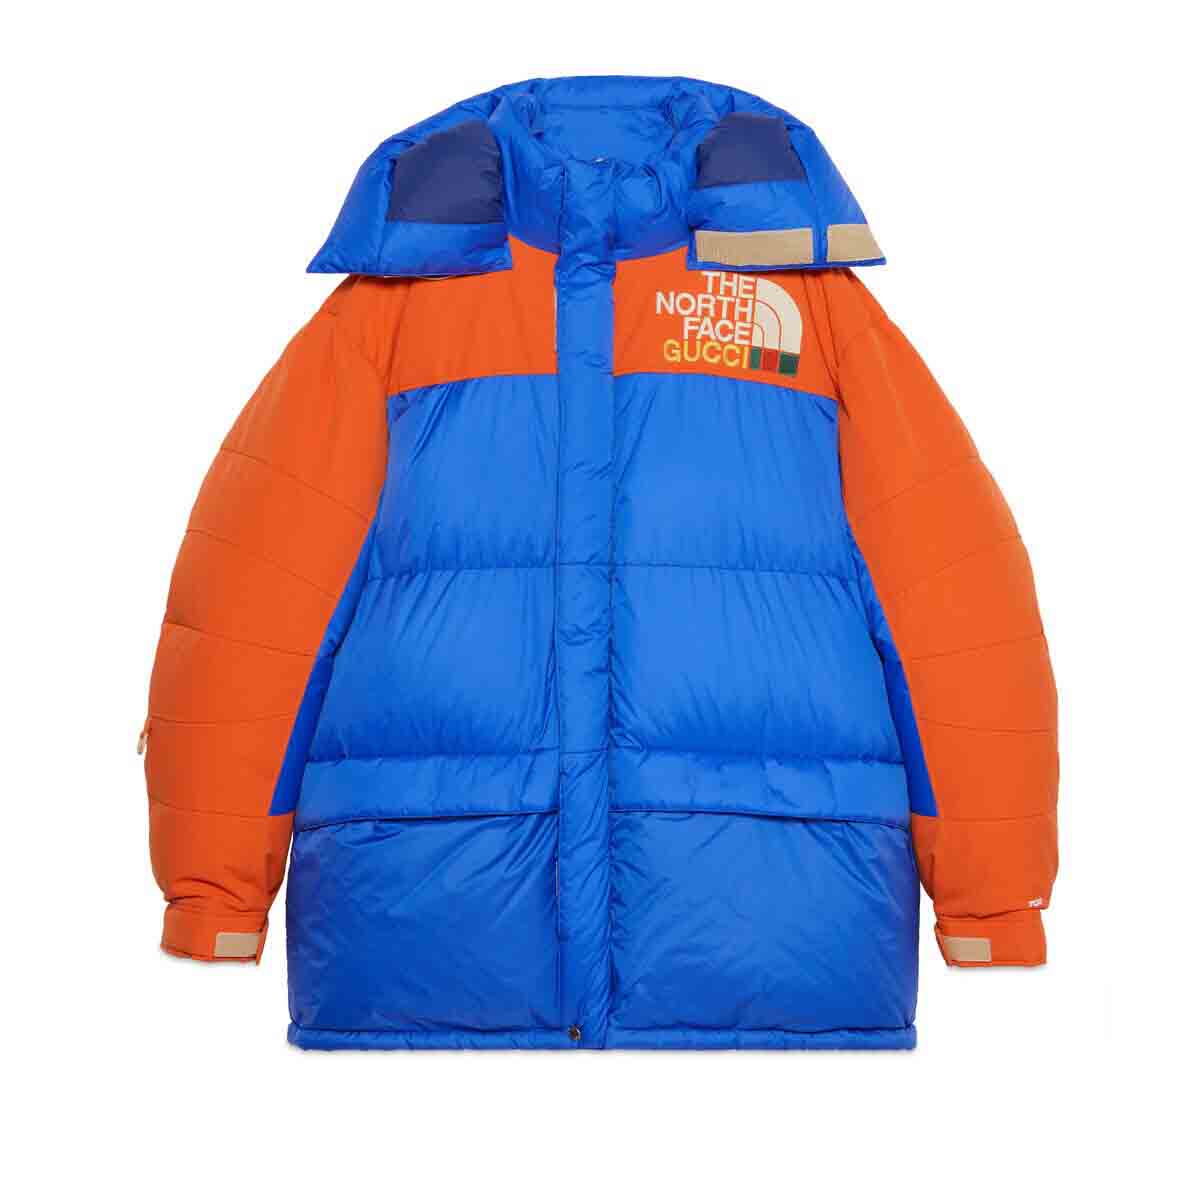 Buy & Sell Other Brands The North Face Streetwear Apparel